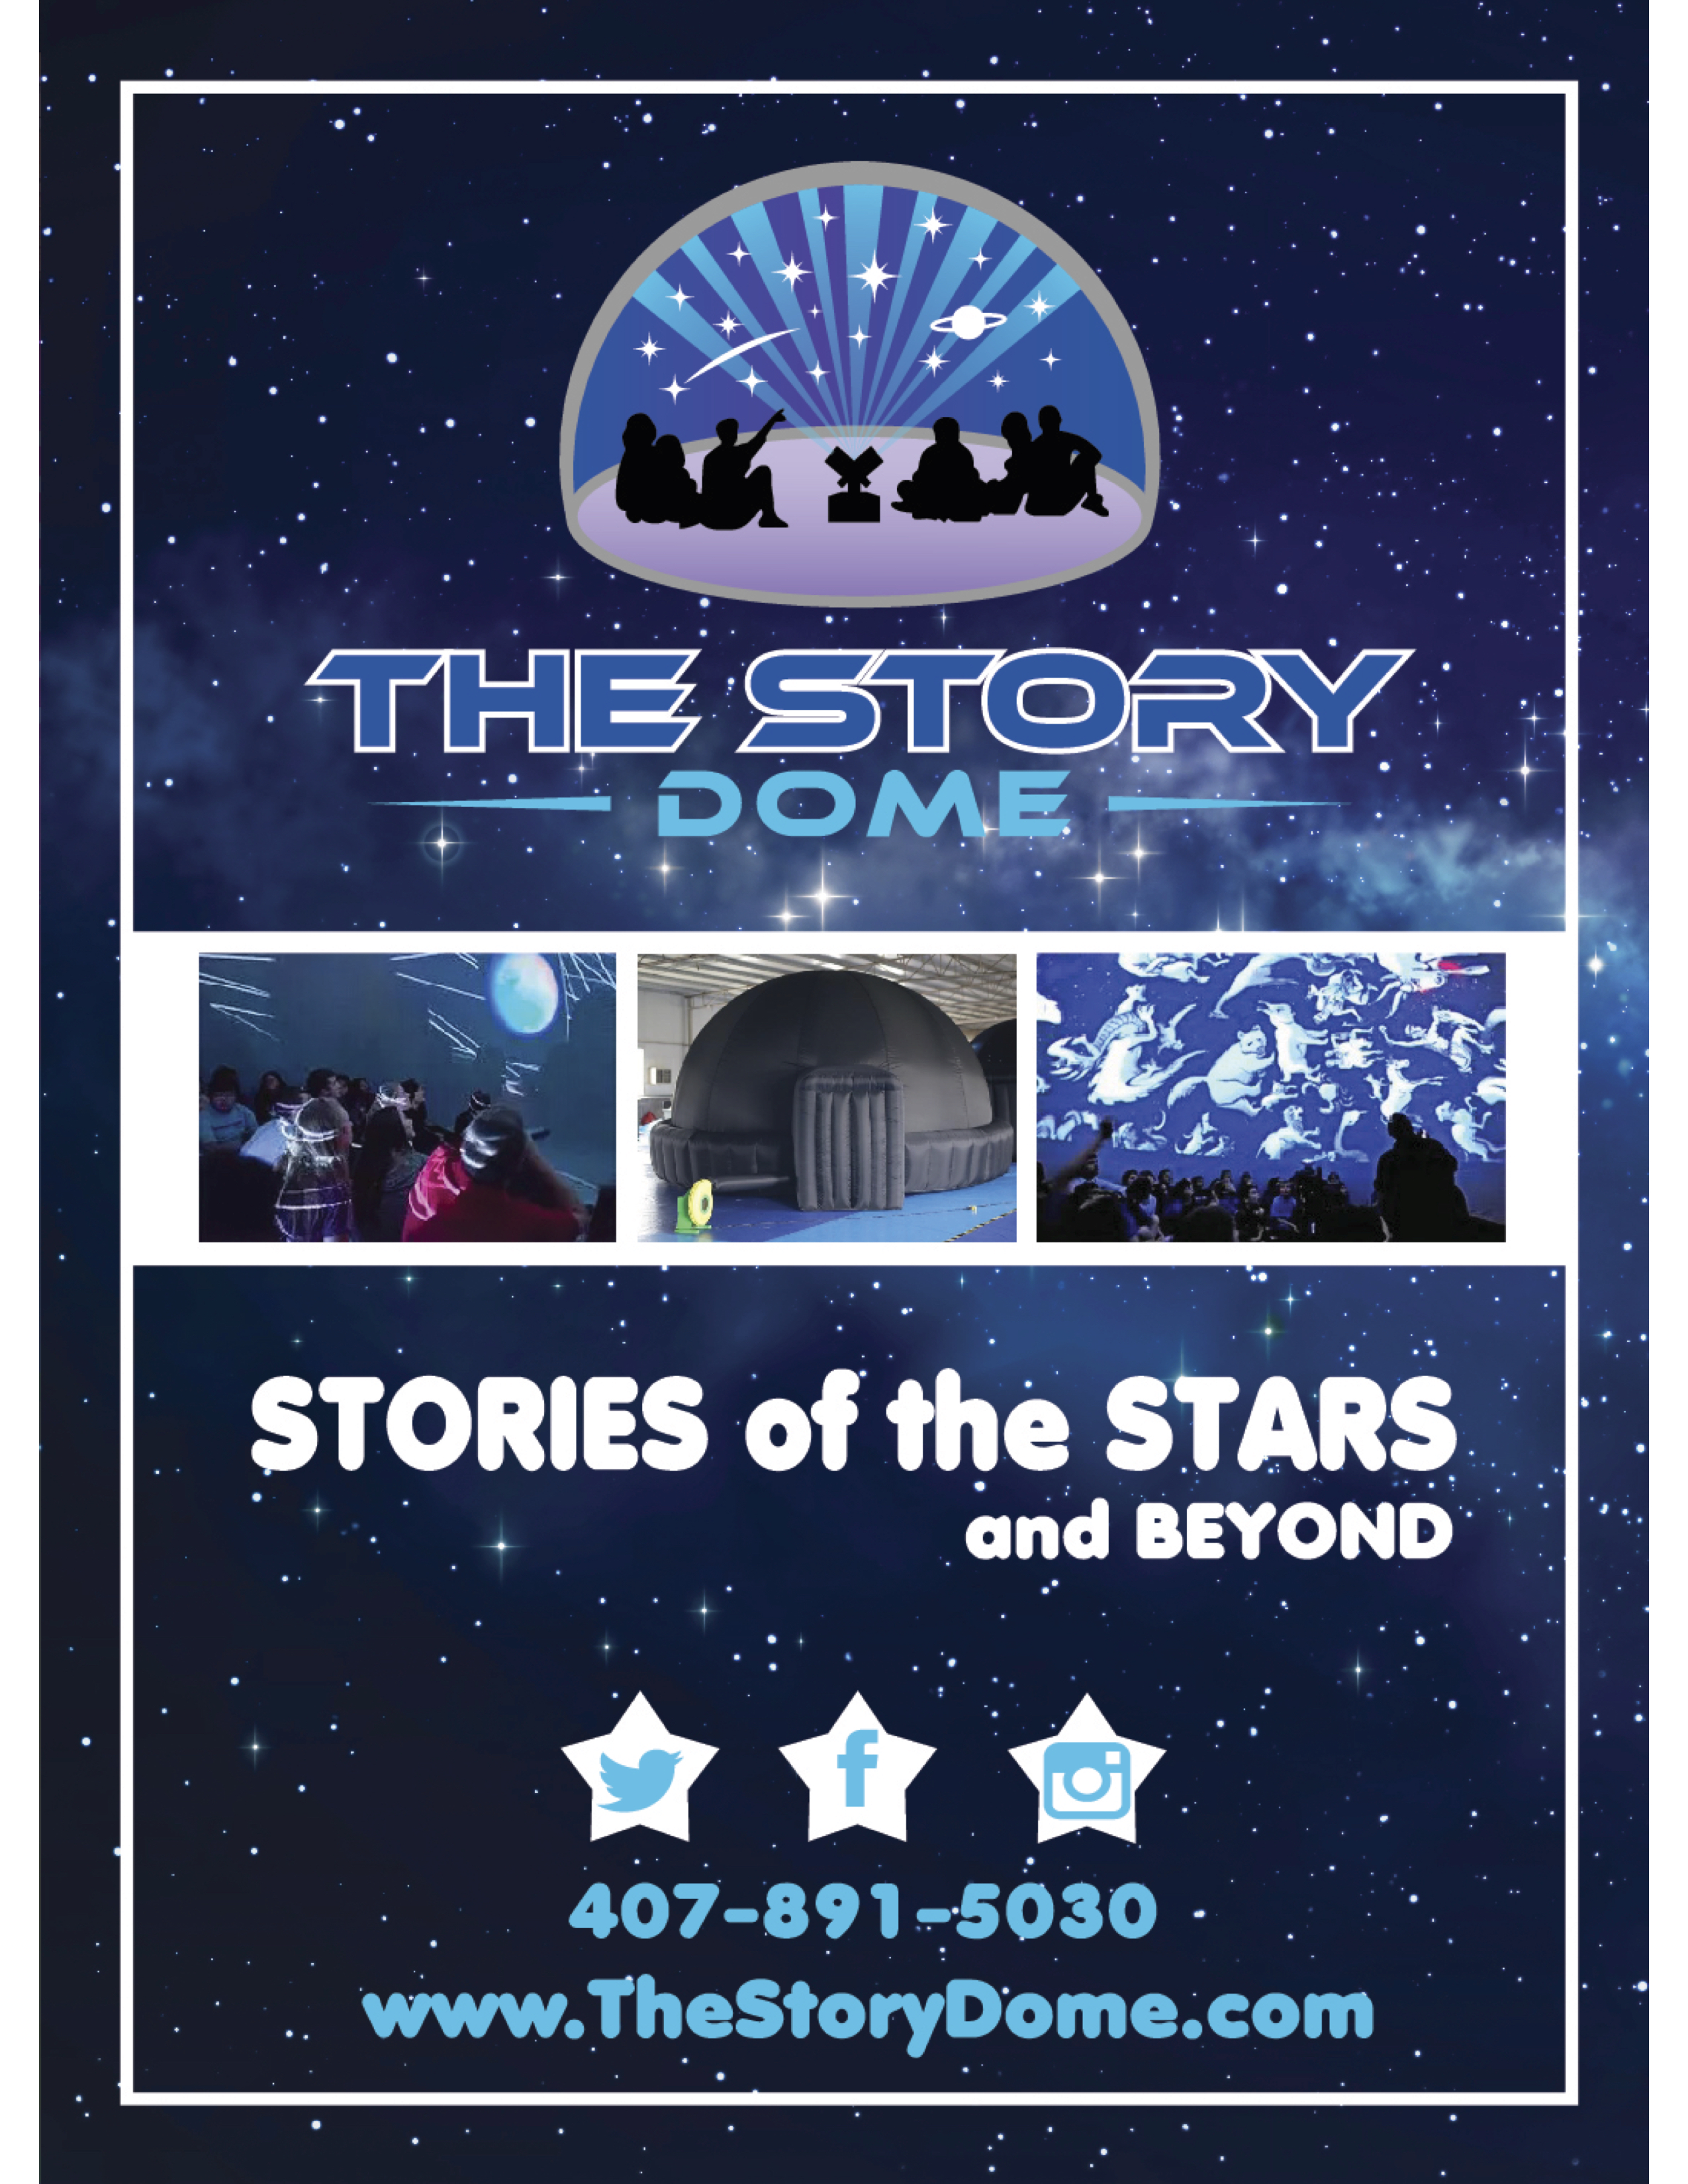 The Story Dome